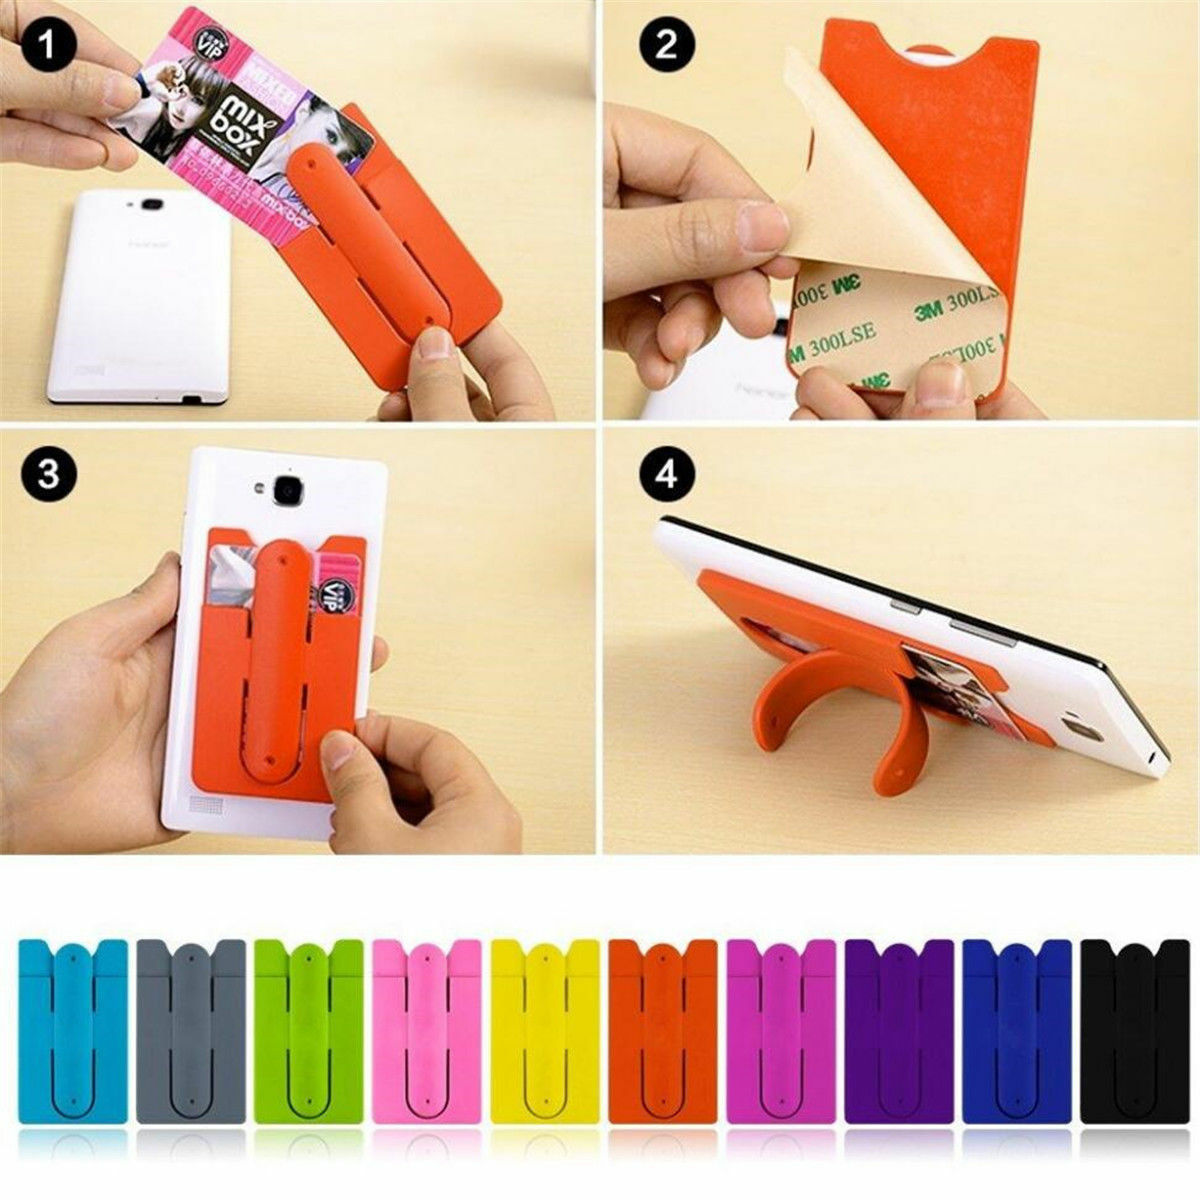 Useful Silicone Wallet Credit Card Stick on Adhesive Holder Pouch Case For Phone